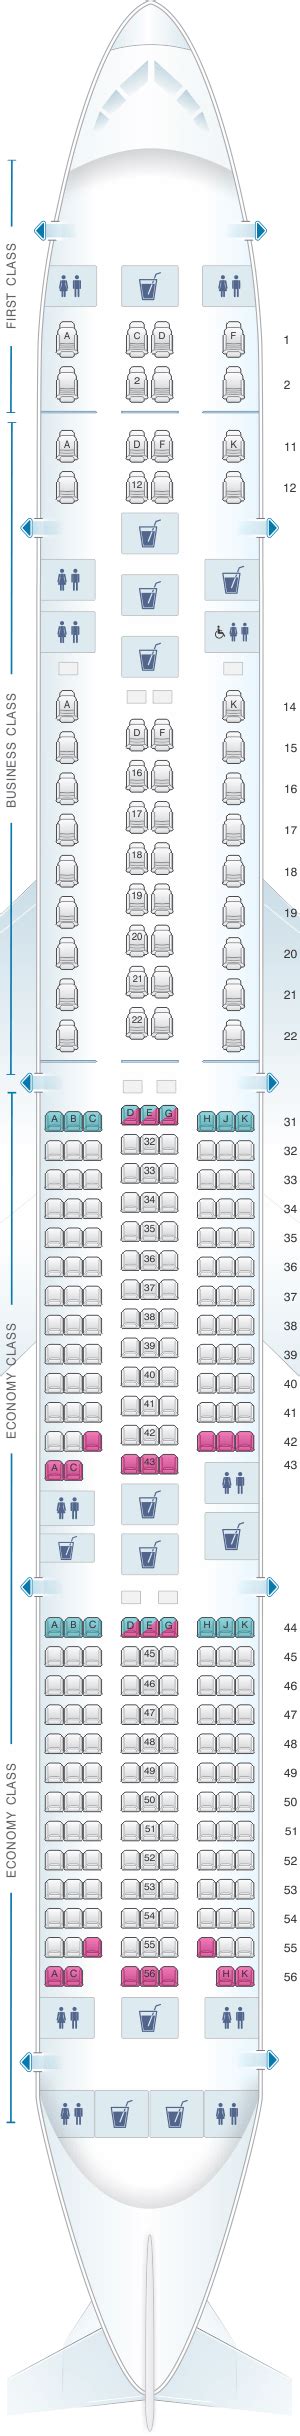 Seat Map Boeing 777 300er Singapore Airlines